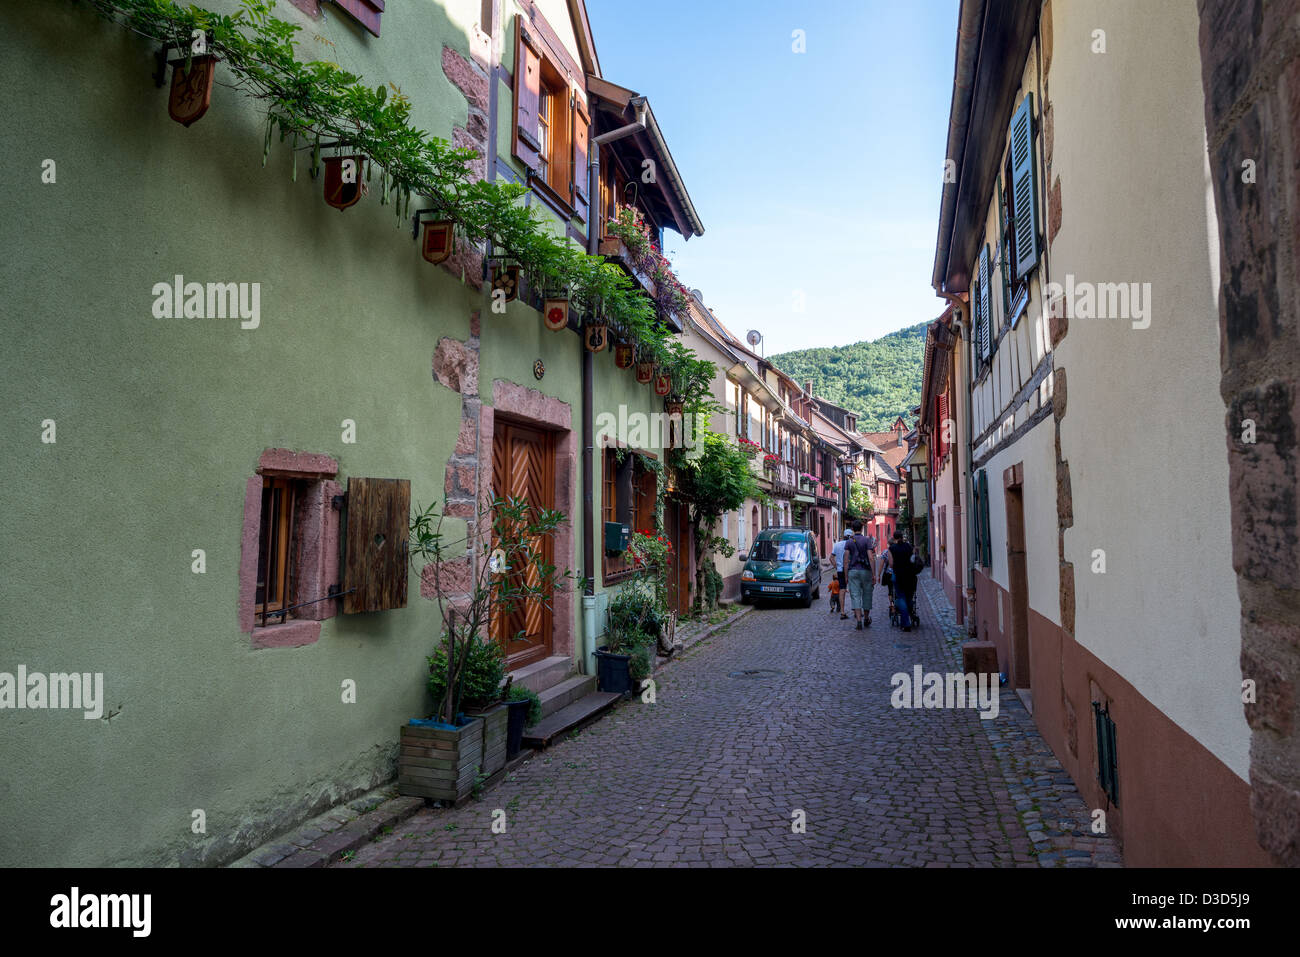 Streets of the old city center of Kaysersberg, Haut-Rhin, Alsace, France Stock Photo